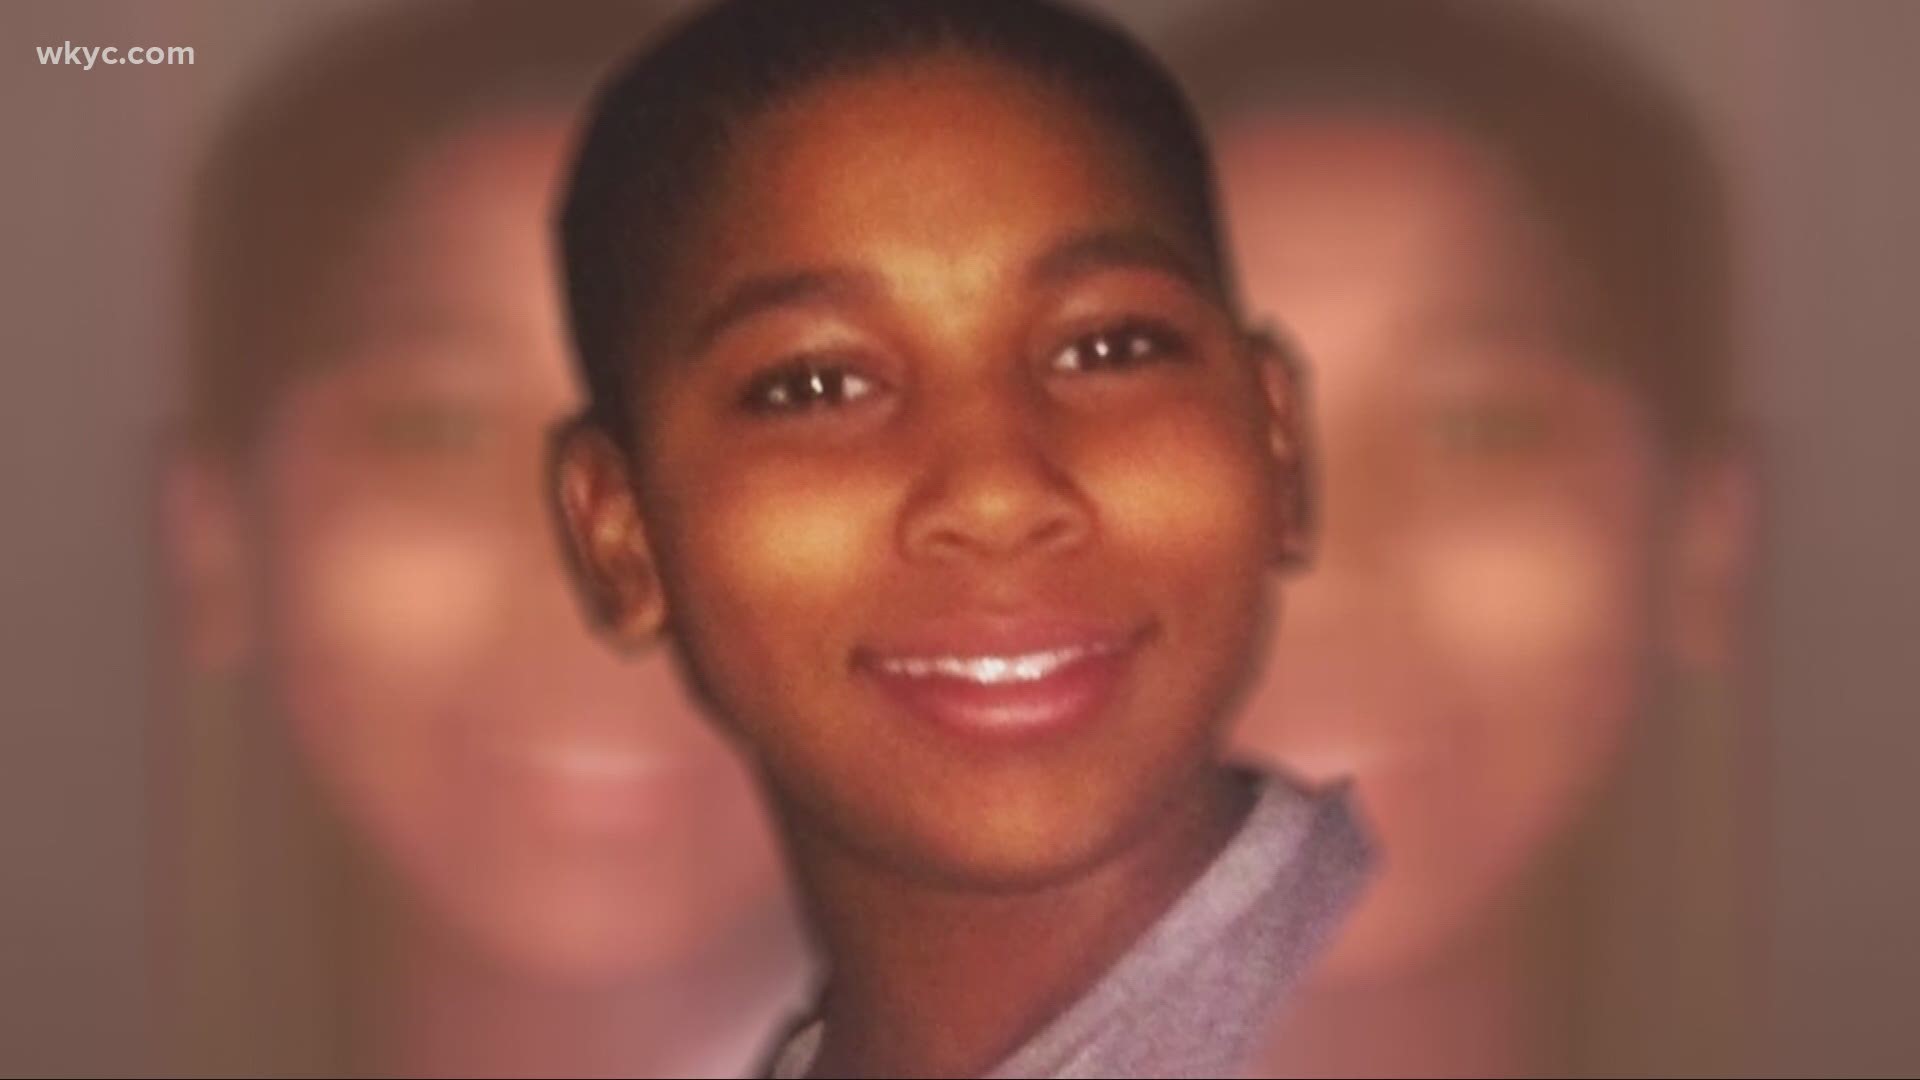 Tamir Rice would've turned 18 on June 25, 2020